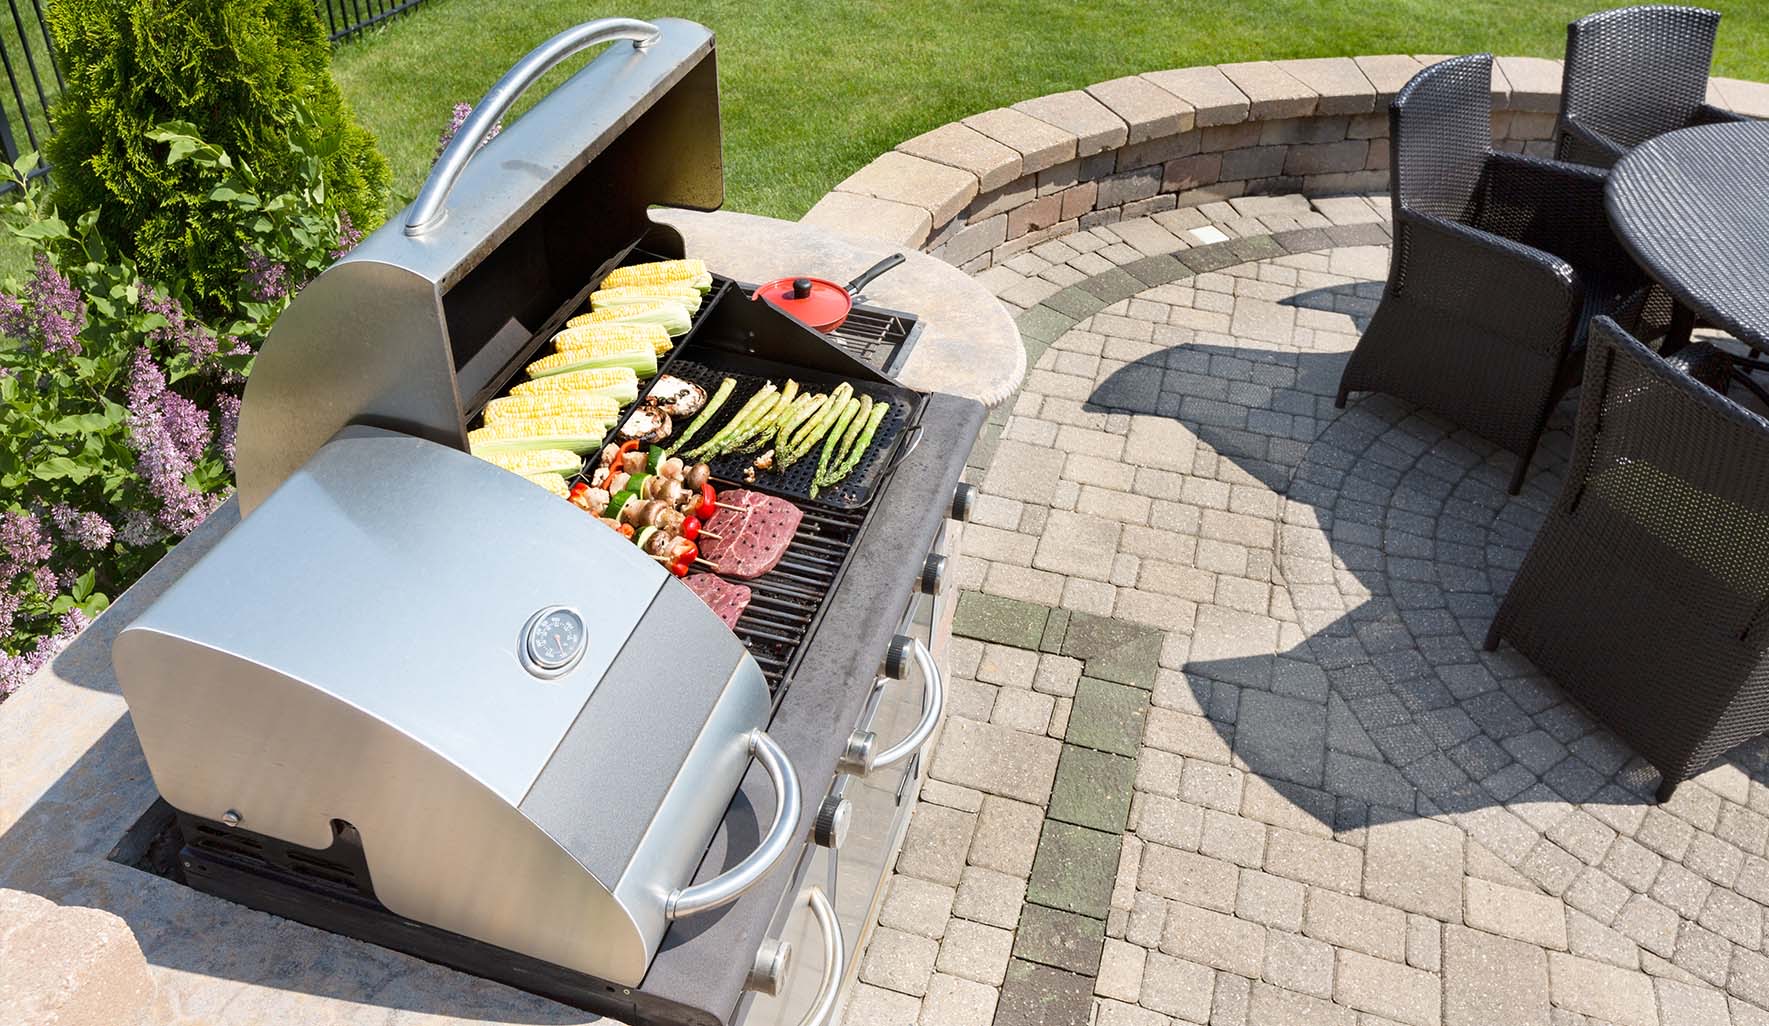 Grill on outdoor stone patio